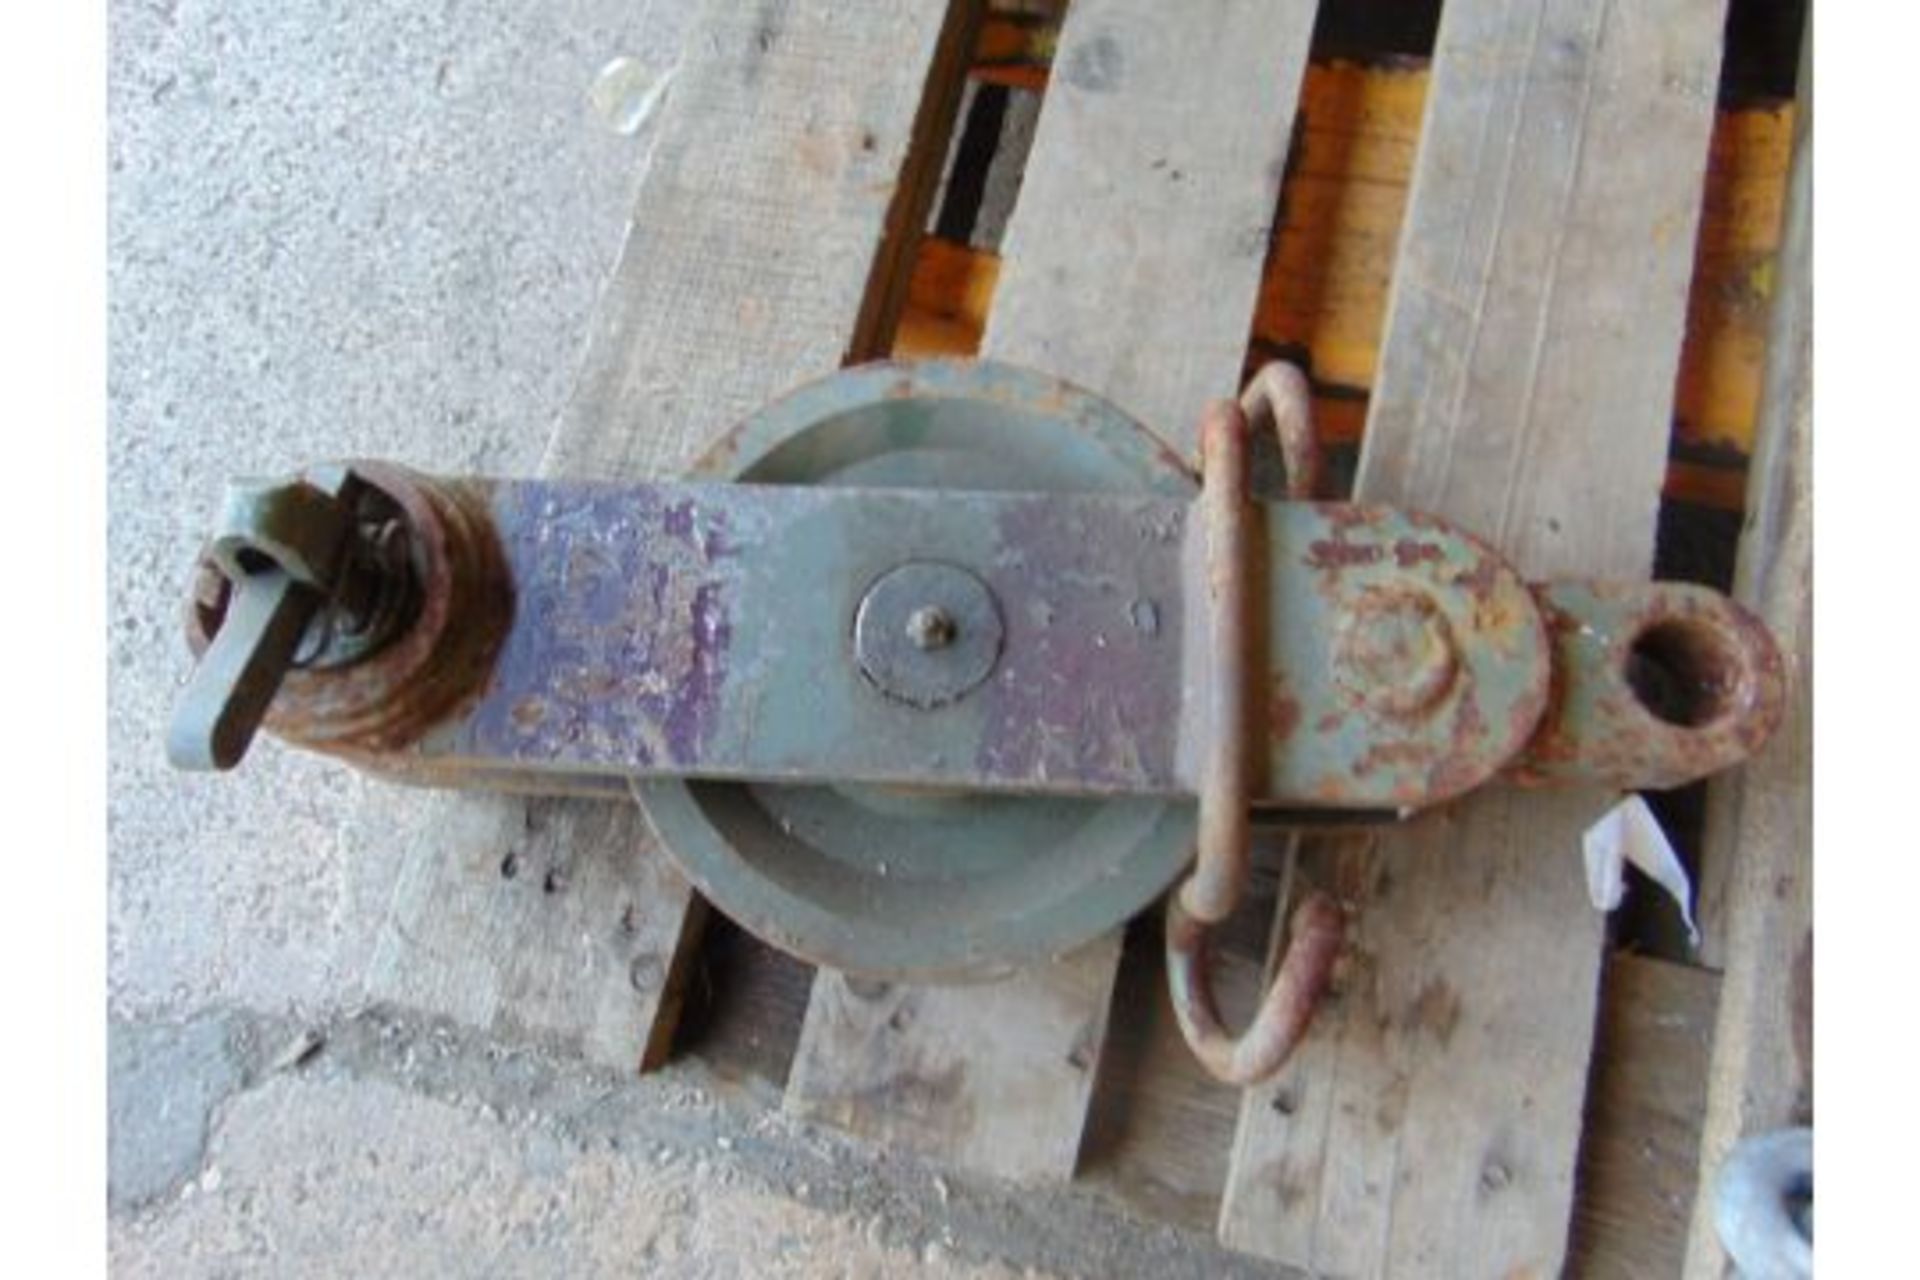 10.5t Single Recovery Pulley Block, as issued on CVR(T) Samson CES - Image 3 of 4